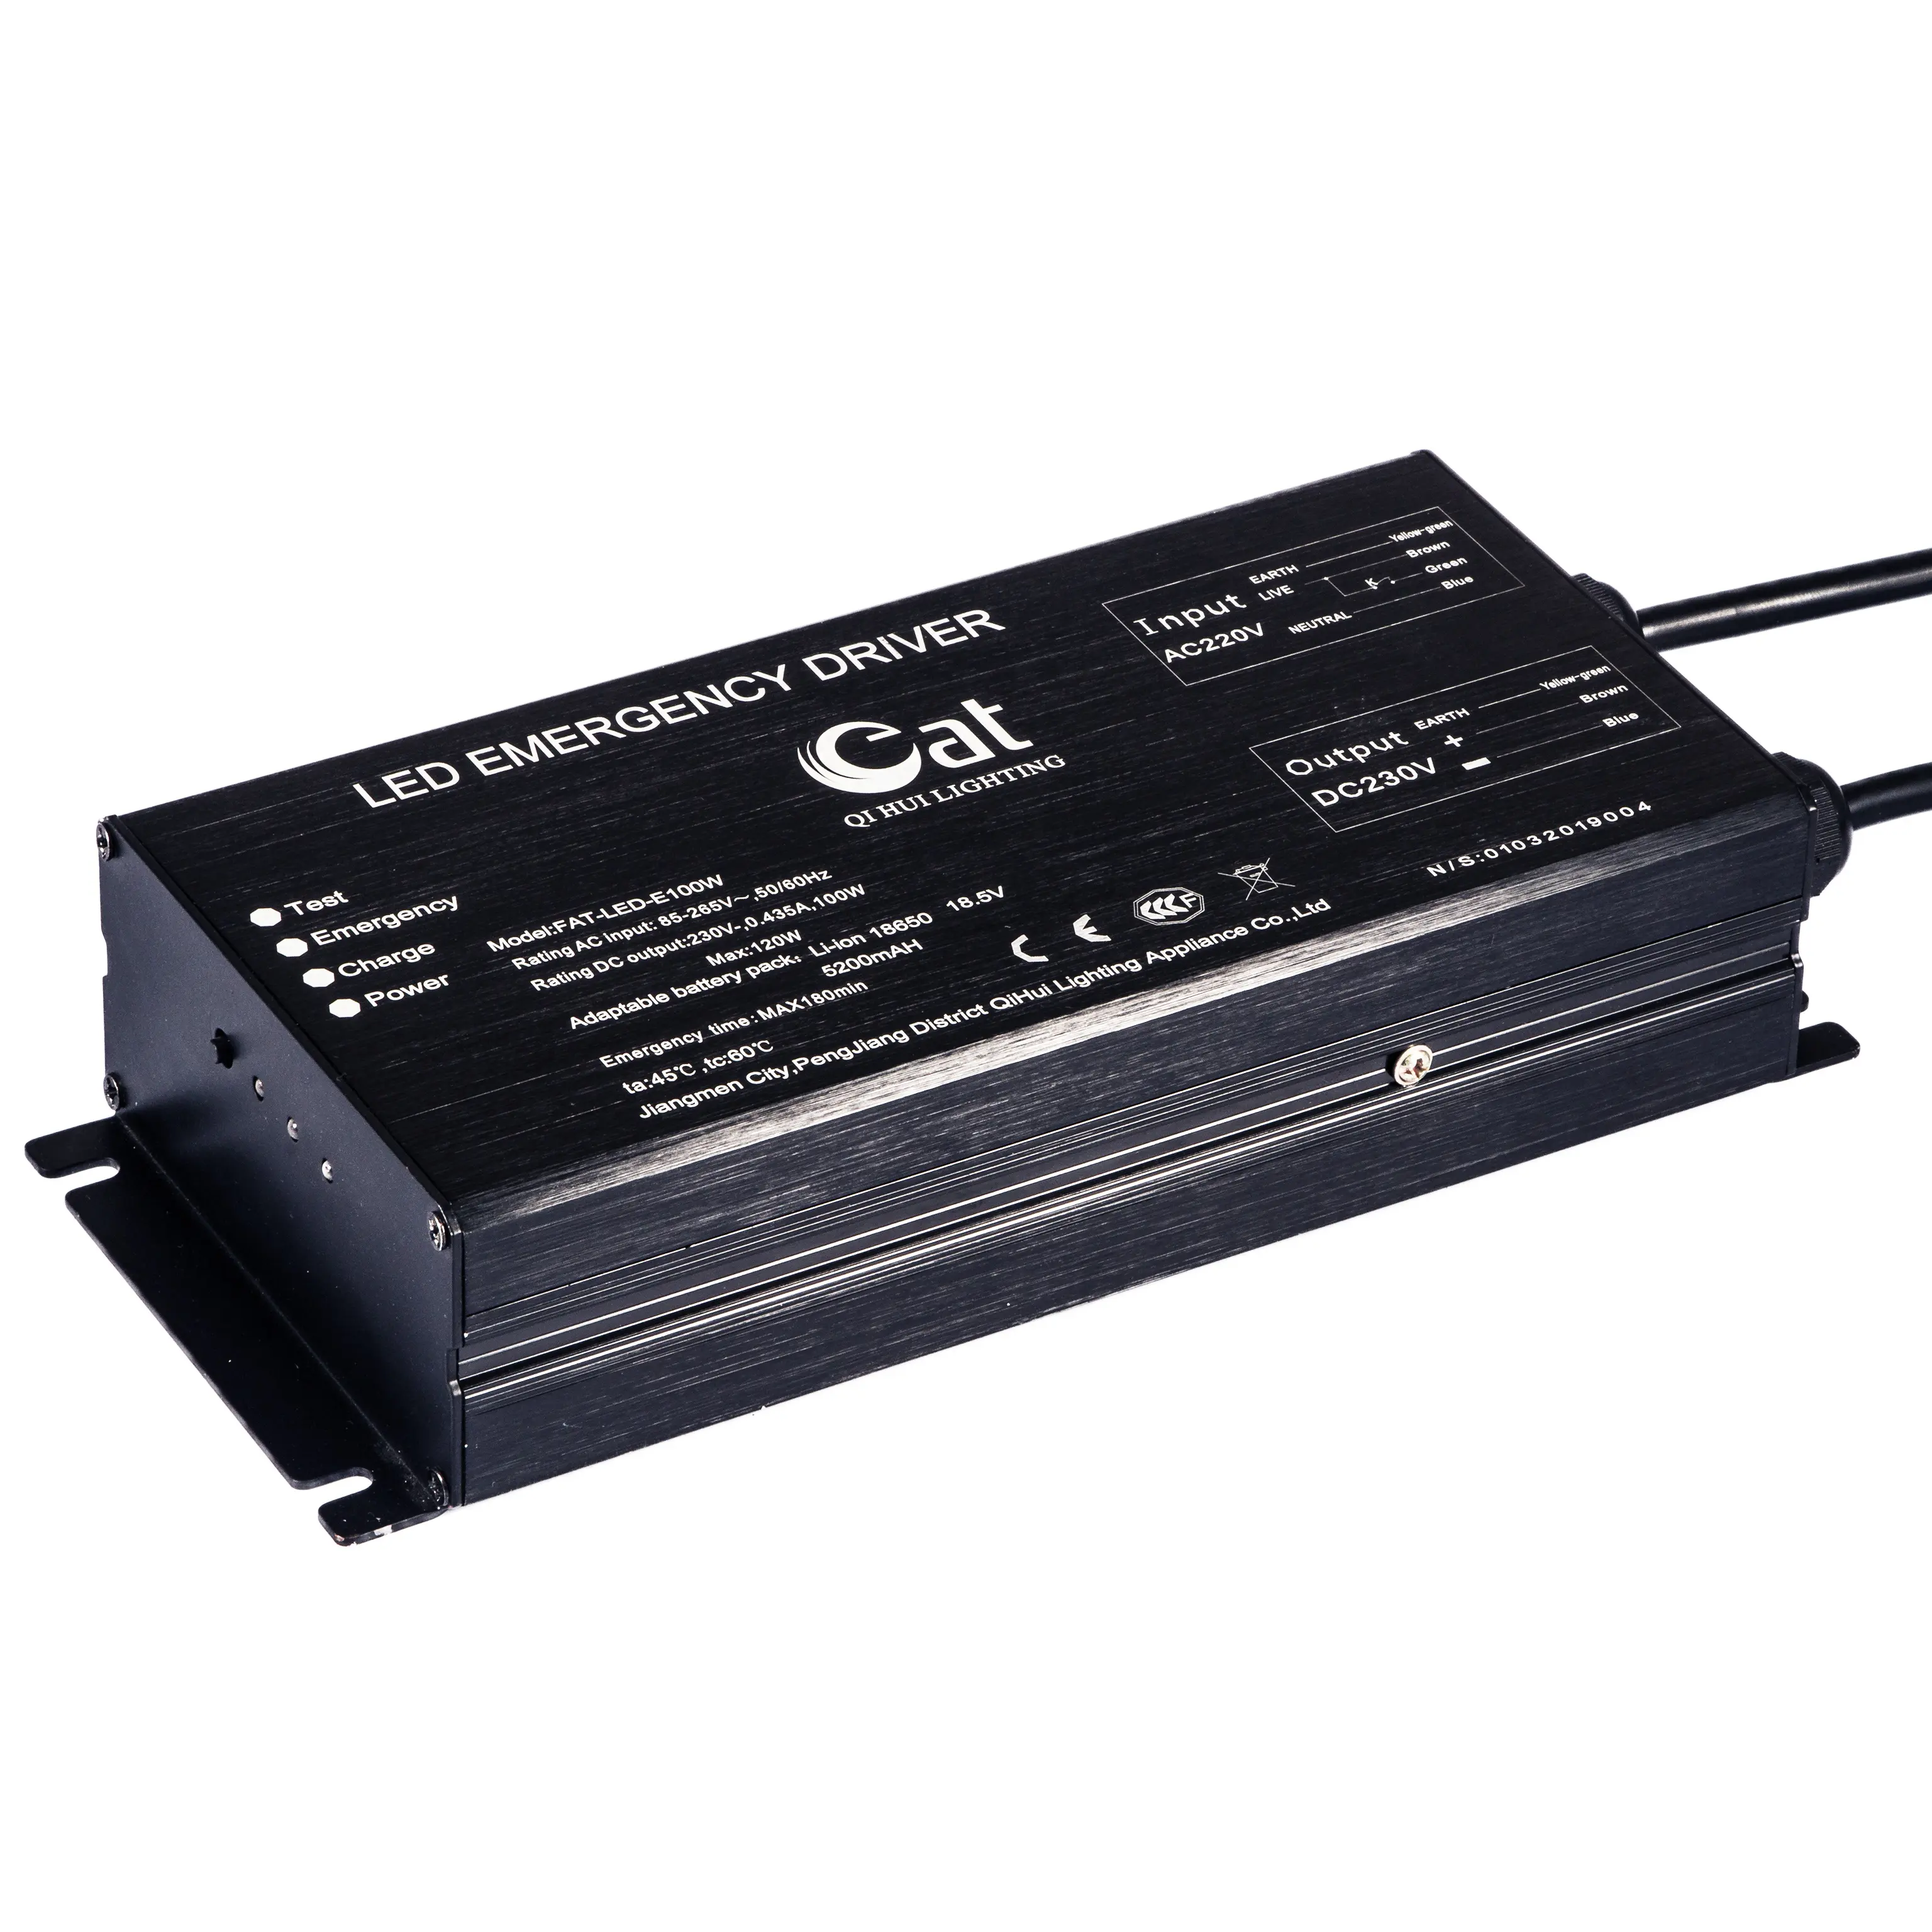 Industrial light strip high power emergency led lighting drive with Li-ion battery backup